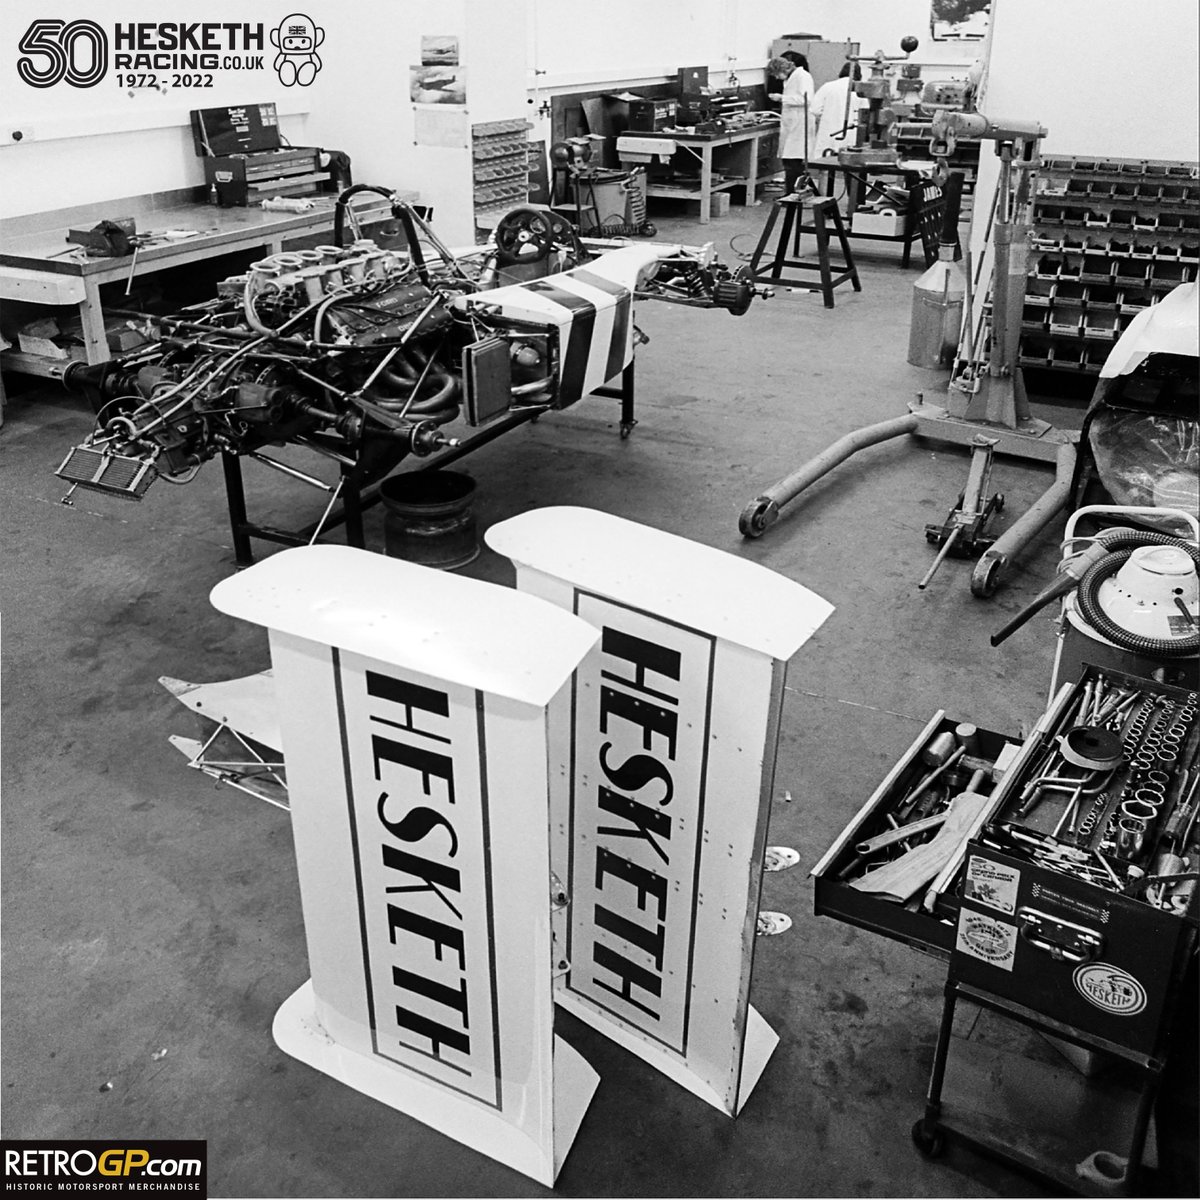 WHERE THE MAGIC HAPPENED
The Hesketh 308 is worked on at HQ. In the old stables, Easton Neston, Towcester. Late April 1974.
bit.ly/HeskethRacing_…
#HeskethRacing #jameshunt #HeskethBear